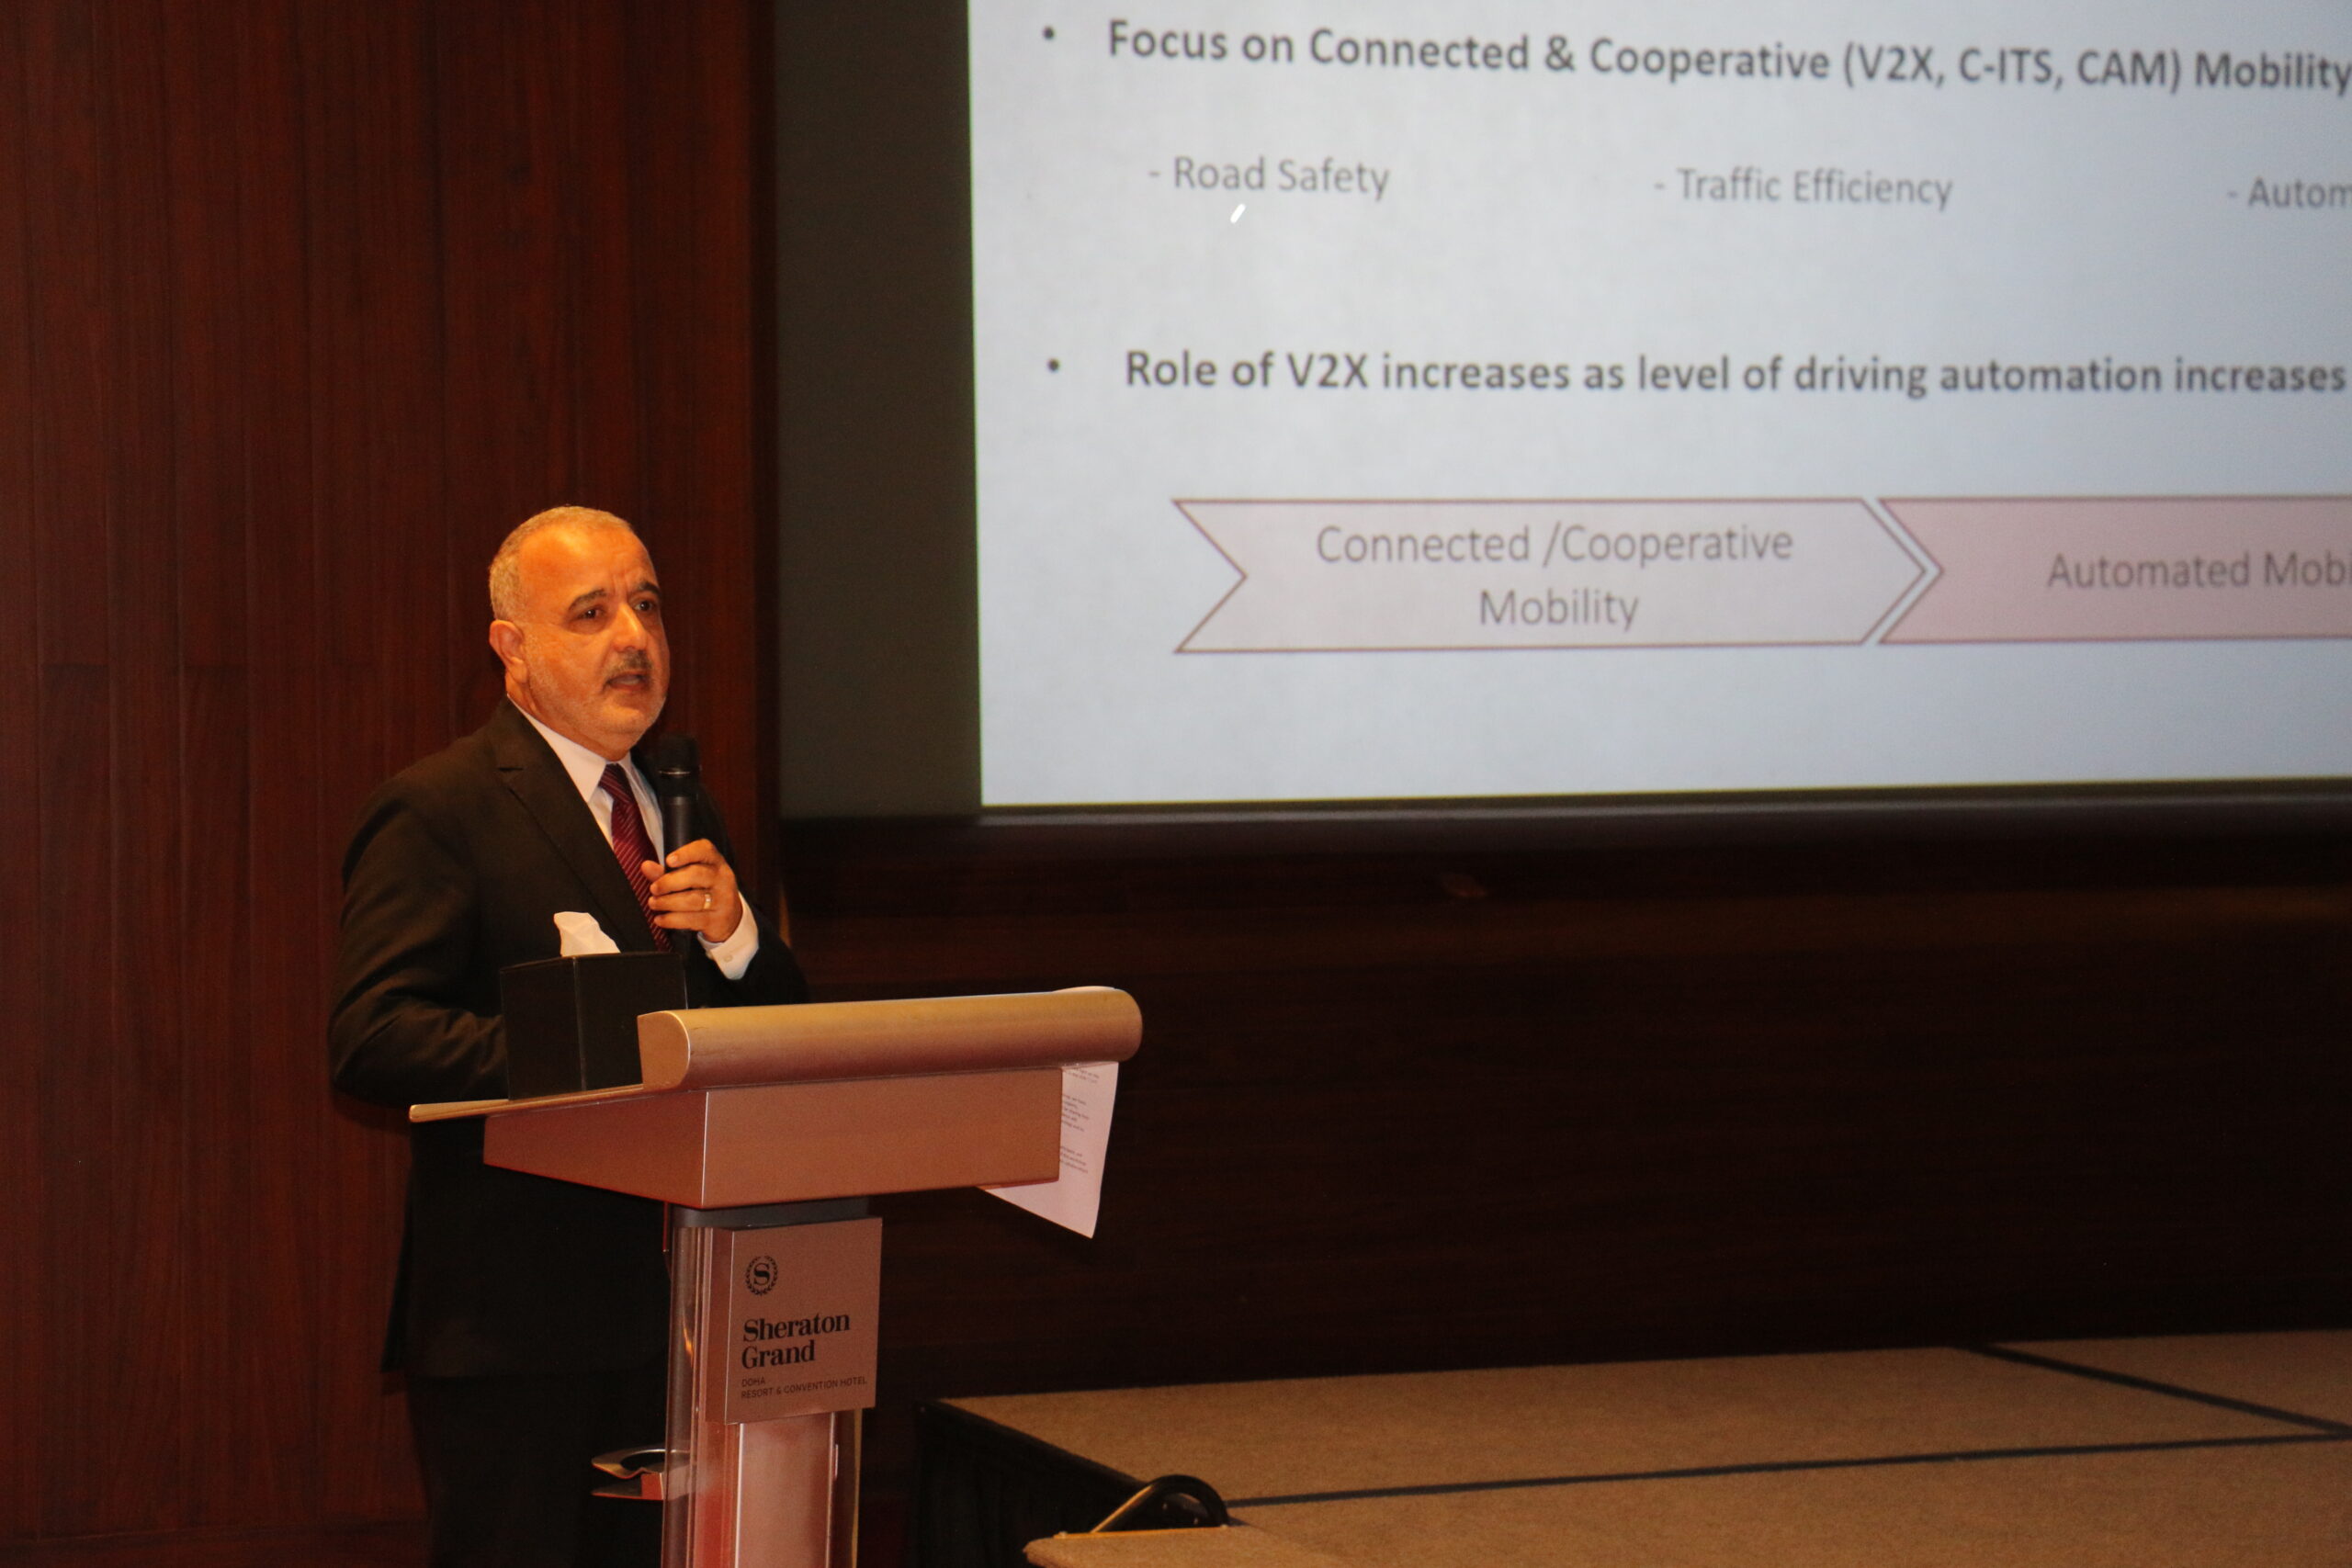 QMIC Holds a Workshop on Connected & Automated Mobility: